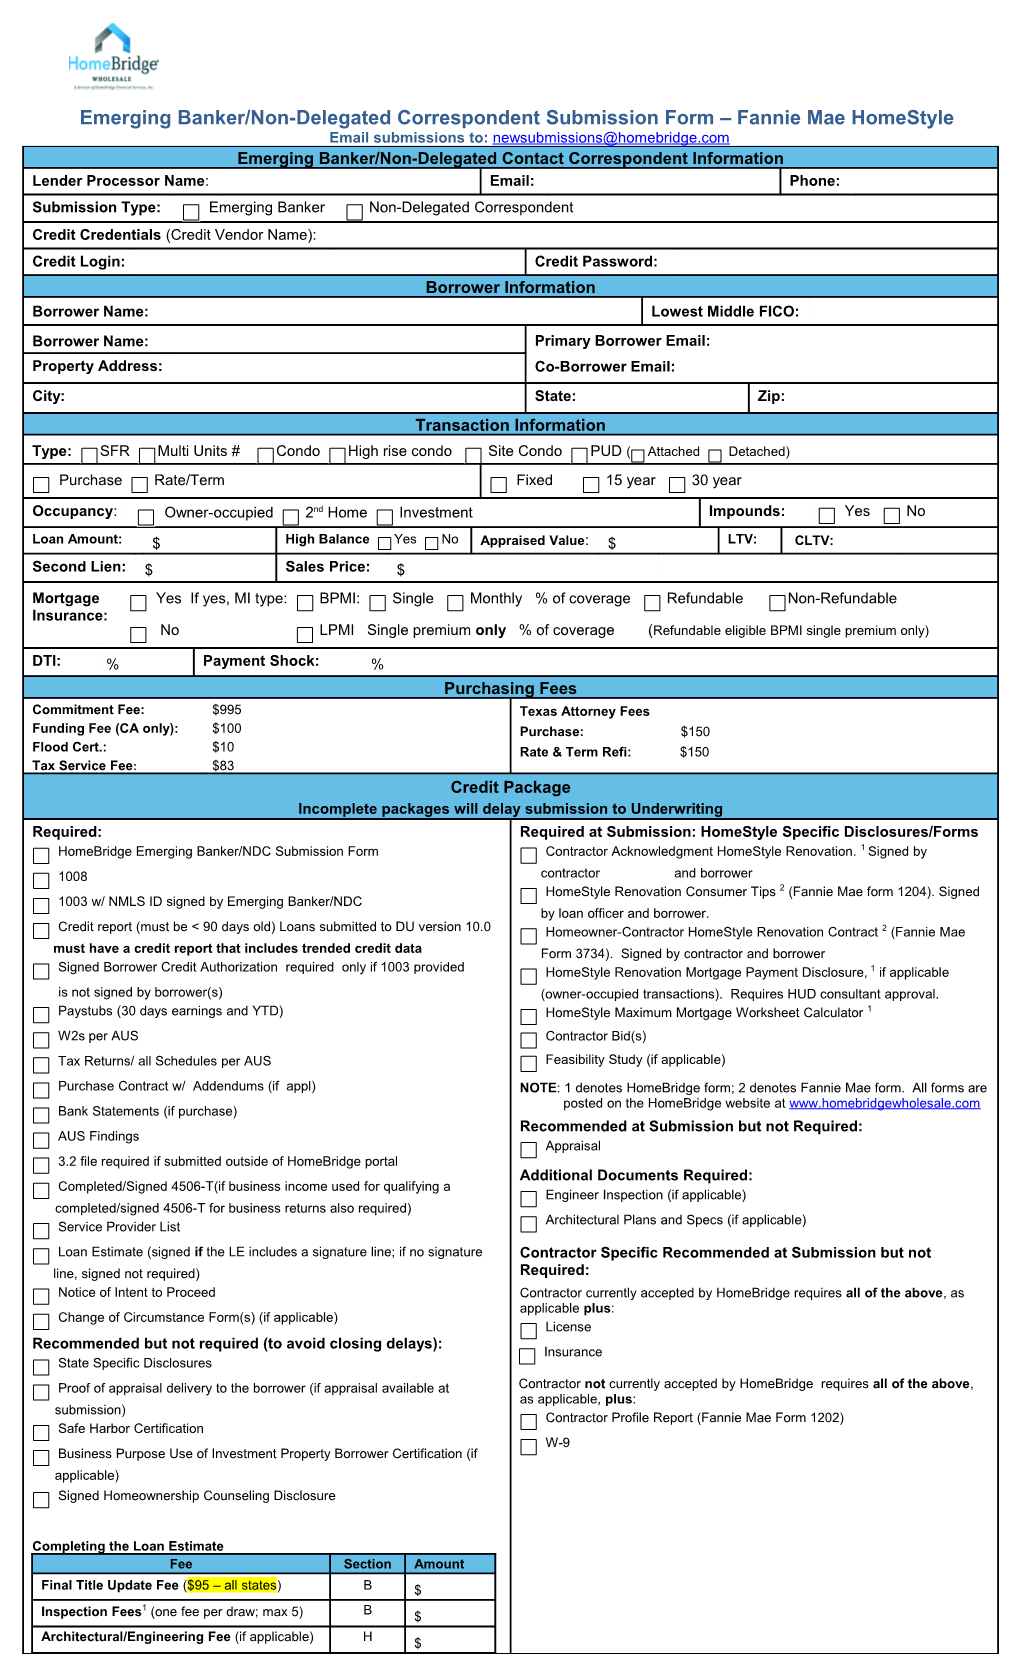 Emerging Banker/Non-Delegated Correspondent Submission Form Fannie Mae Homestyle Email